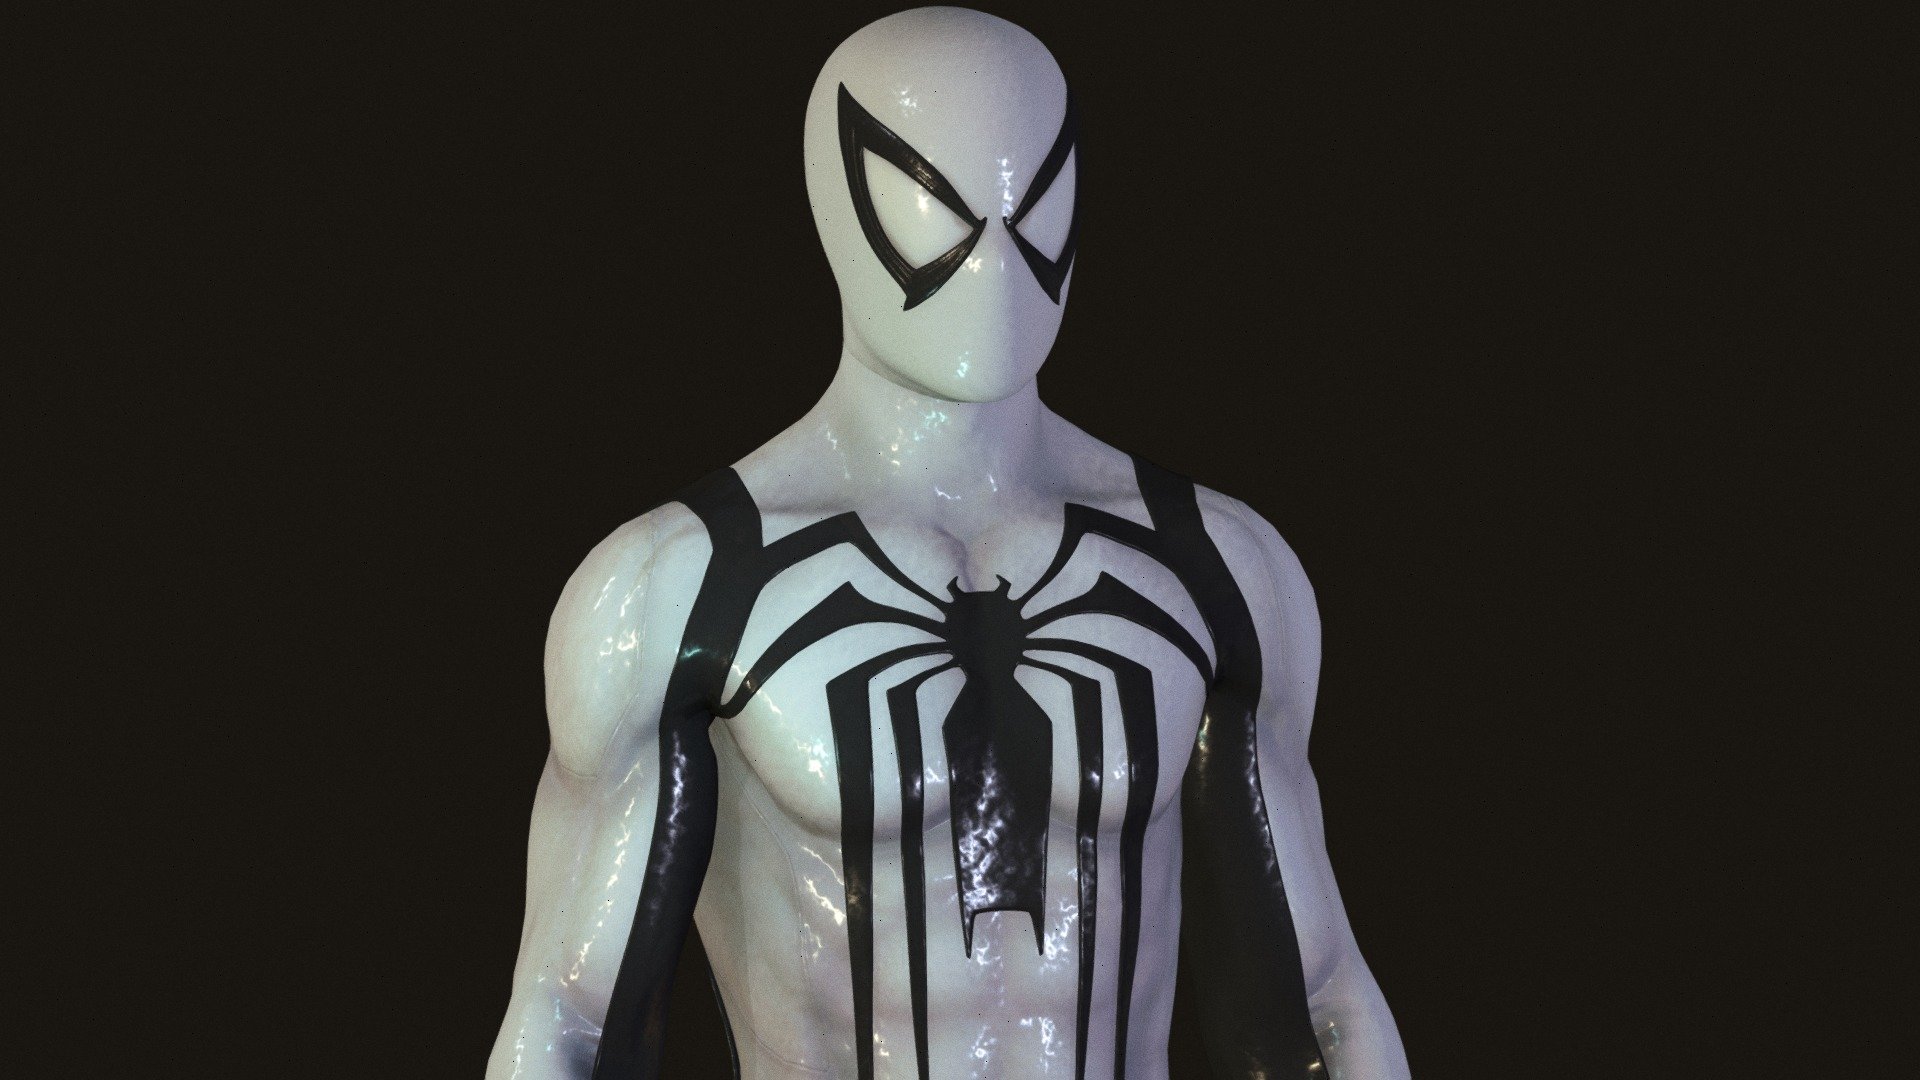 I originally created this 3D model inspired by Anti-Venom suit from Marvel's Spider-man 2 for a Spider-Man PC mod. 

https://www.deviantart.com/rezanur825/art/Marve-s-Spider-man-2-Anti-venom-Suit-997627525 - Marvel 's Spider-man 2 (MSM2) Anti-venom suit - 3D model by Rezauddin Nur (@reza825) 3d model